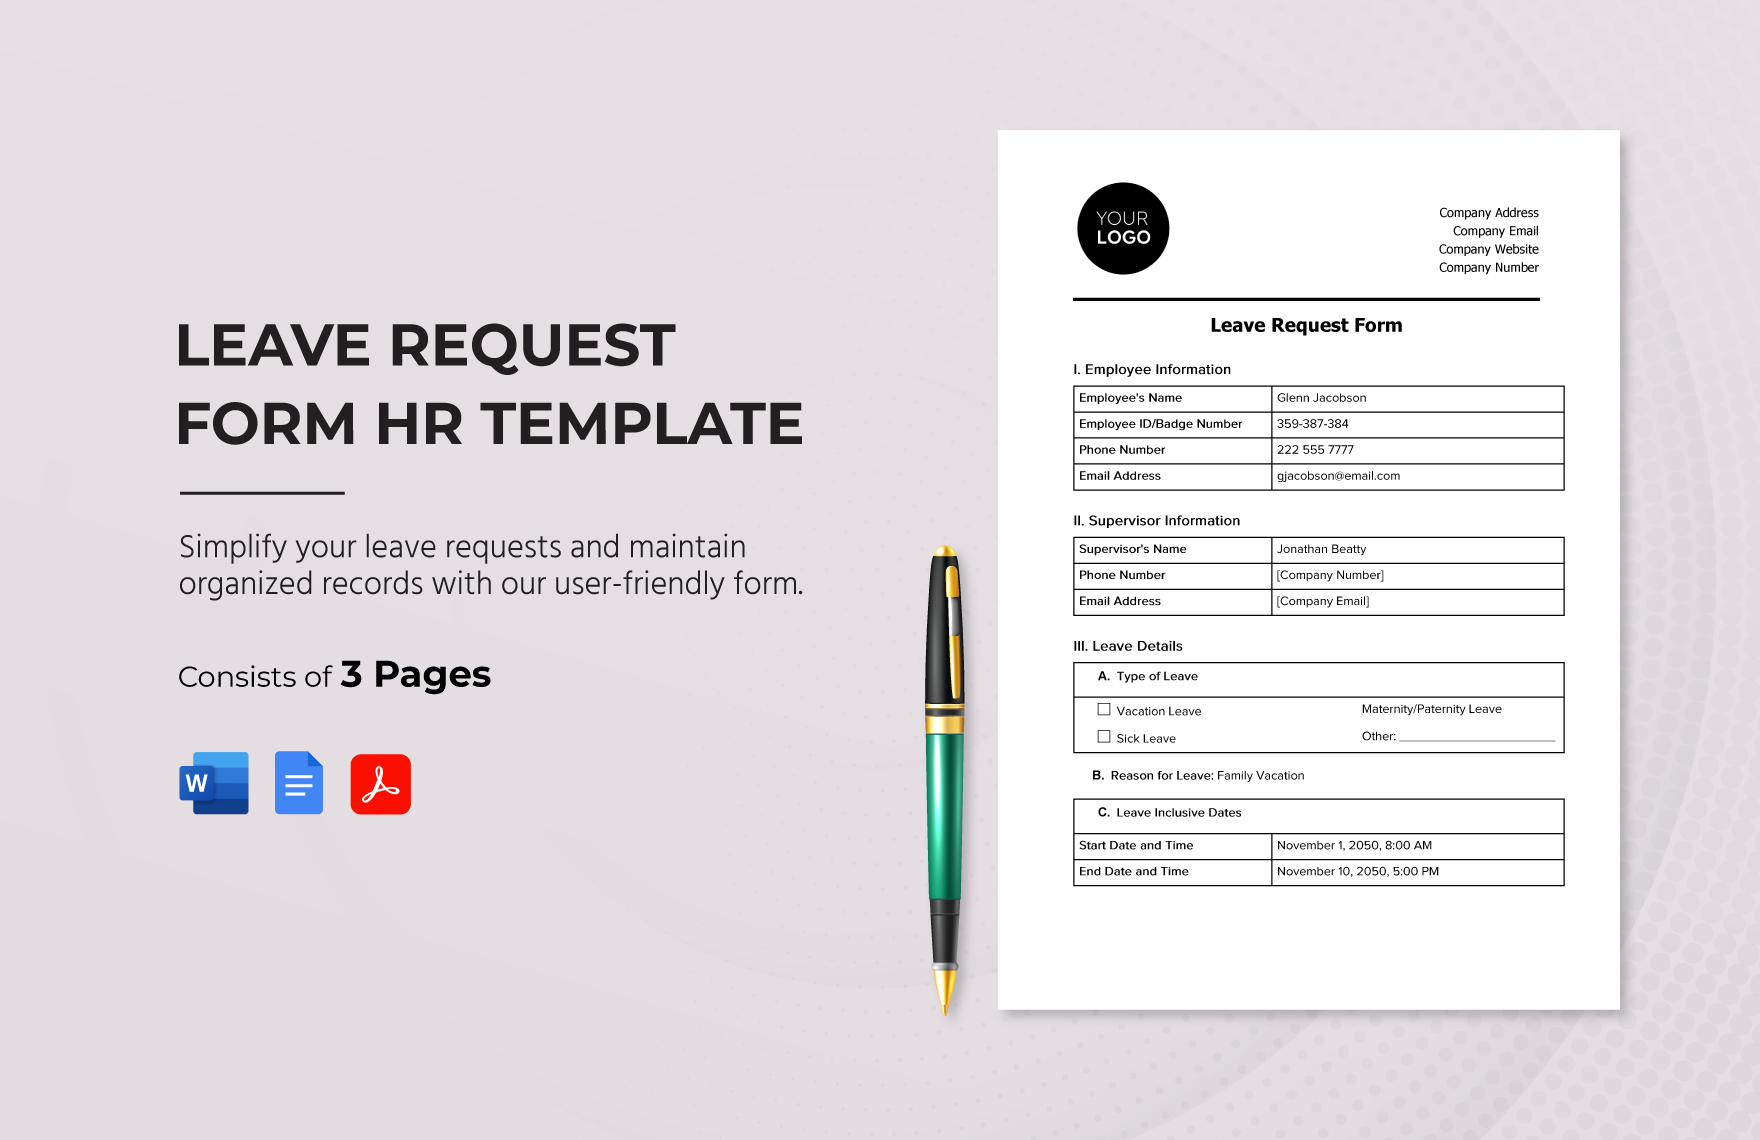 Leave Request Form HR Template